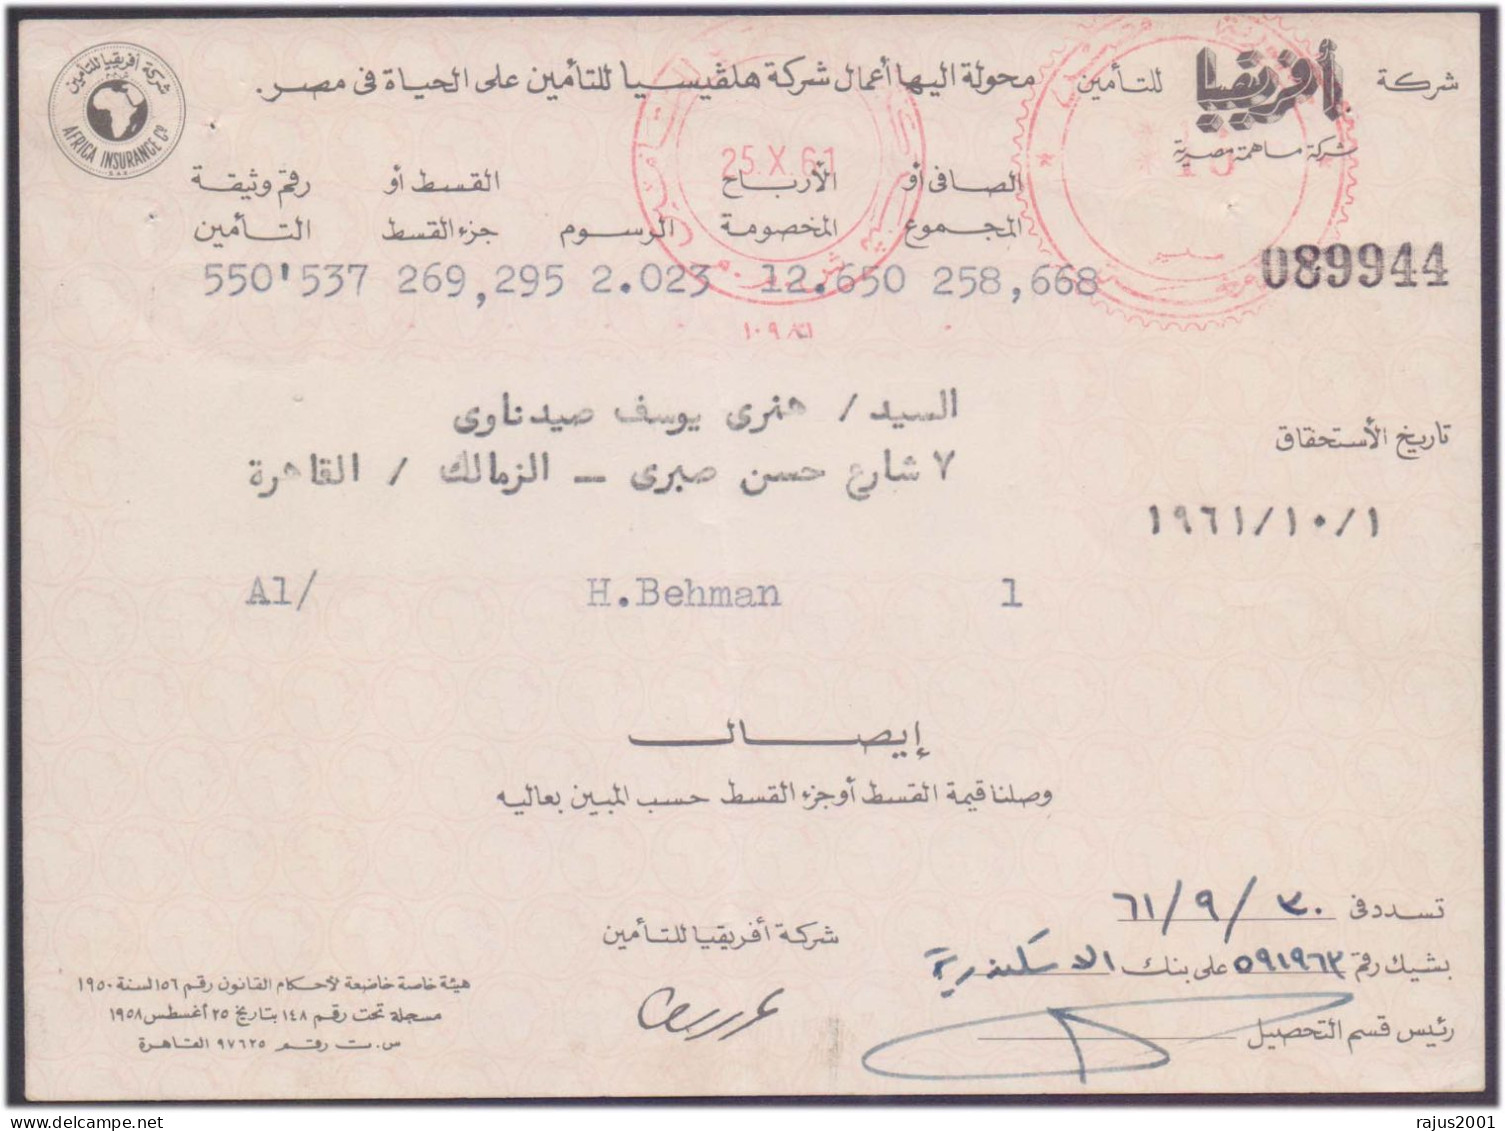 Business Of Helqisia Life Insurance Company In Egypt, RED METER FRANK, EMA, Receipt Old Document Egypt 1960 - Briefe U. Dokumente